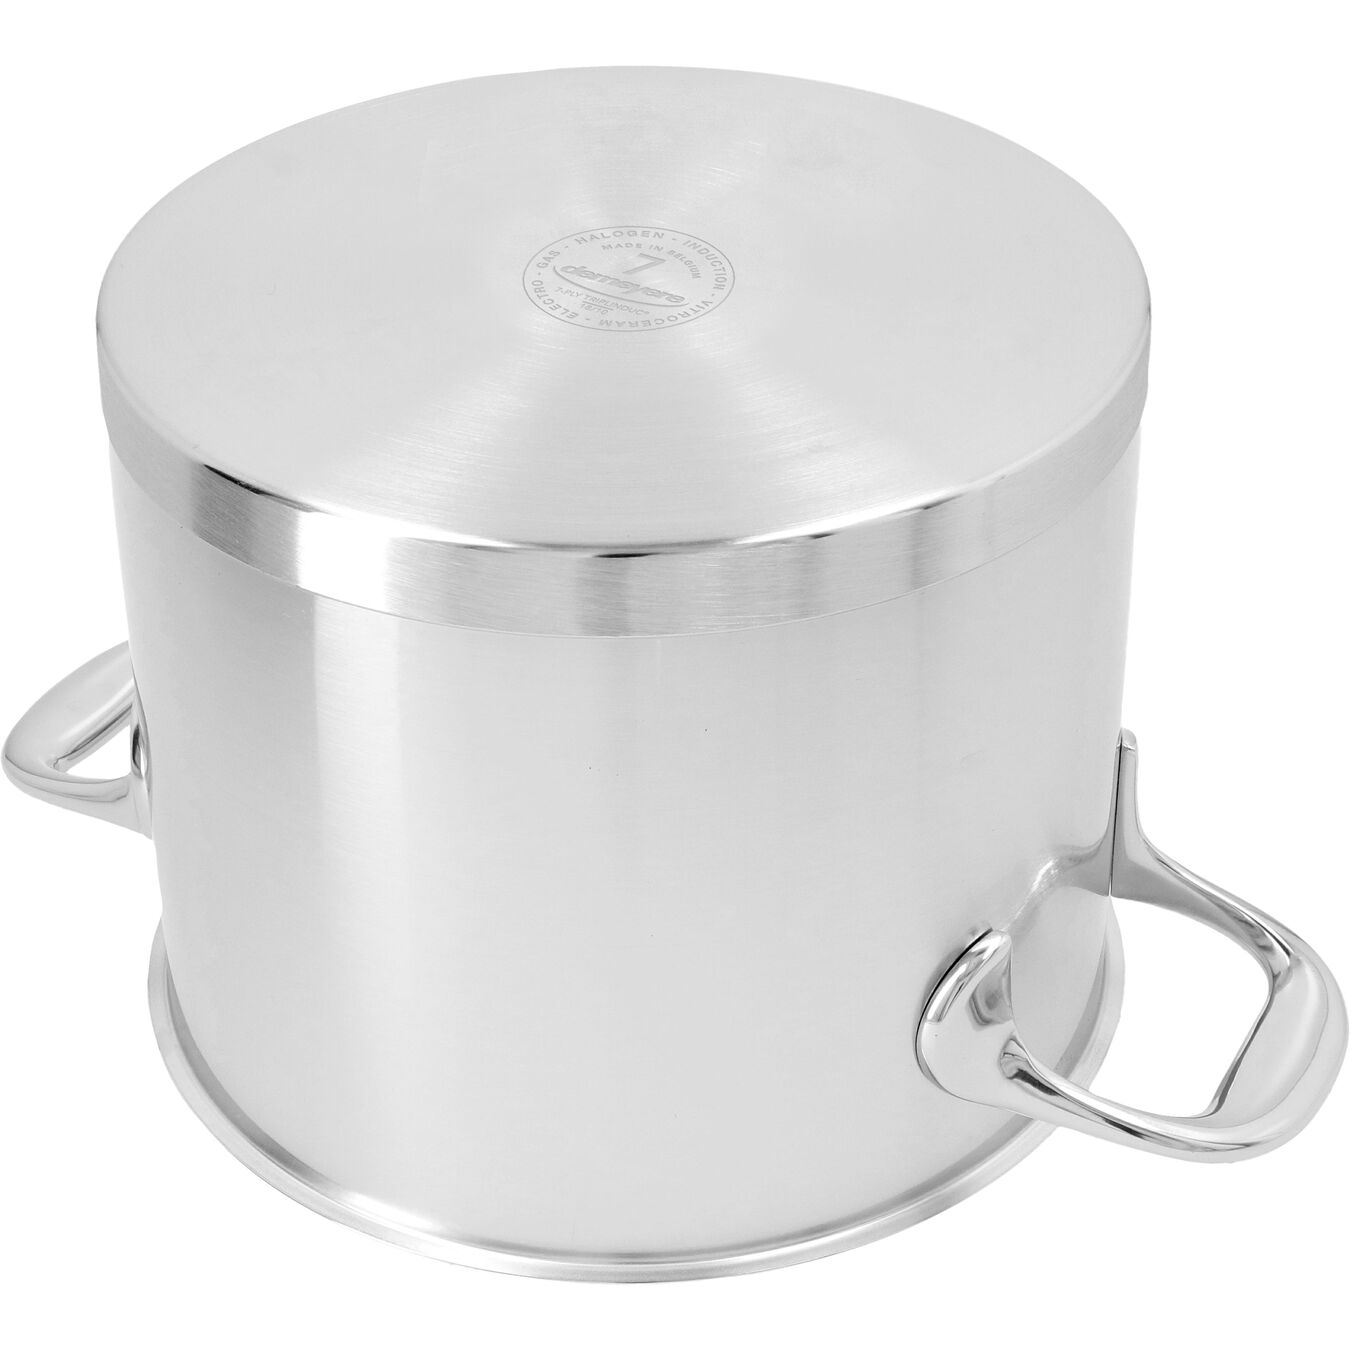 5 l 18/10 Stainless Steel Stock pot with lid,,large 6